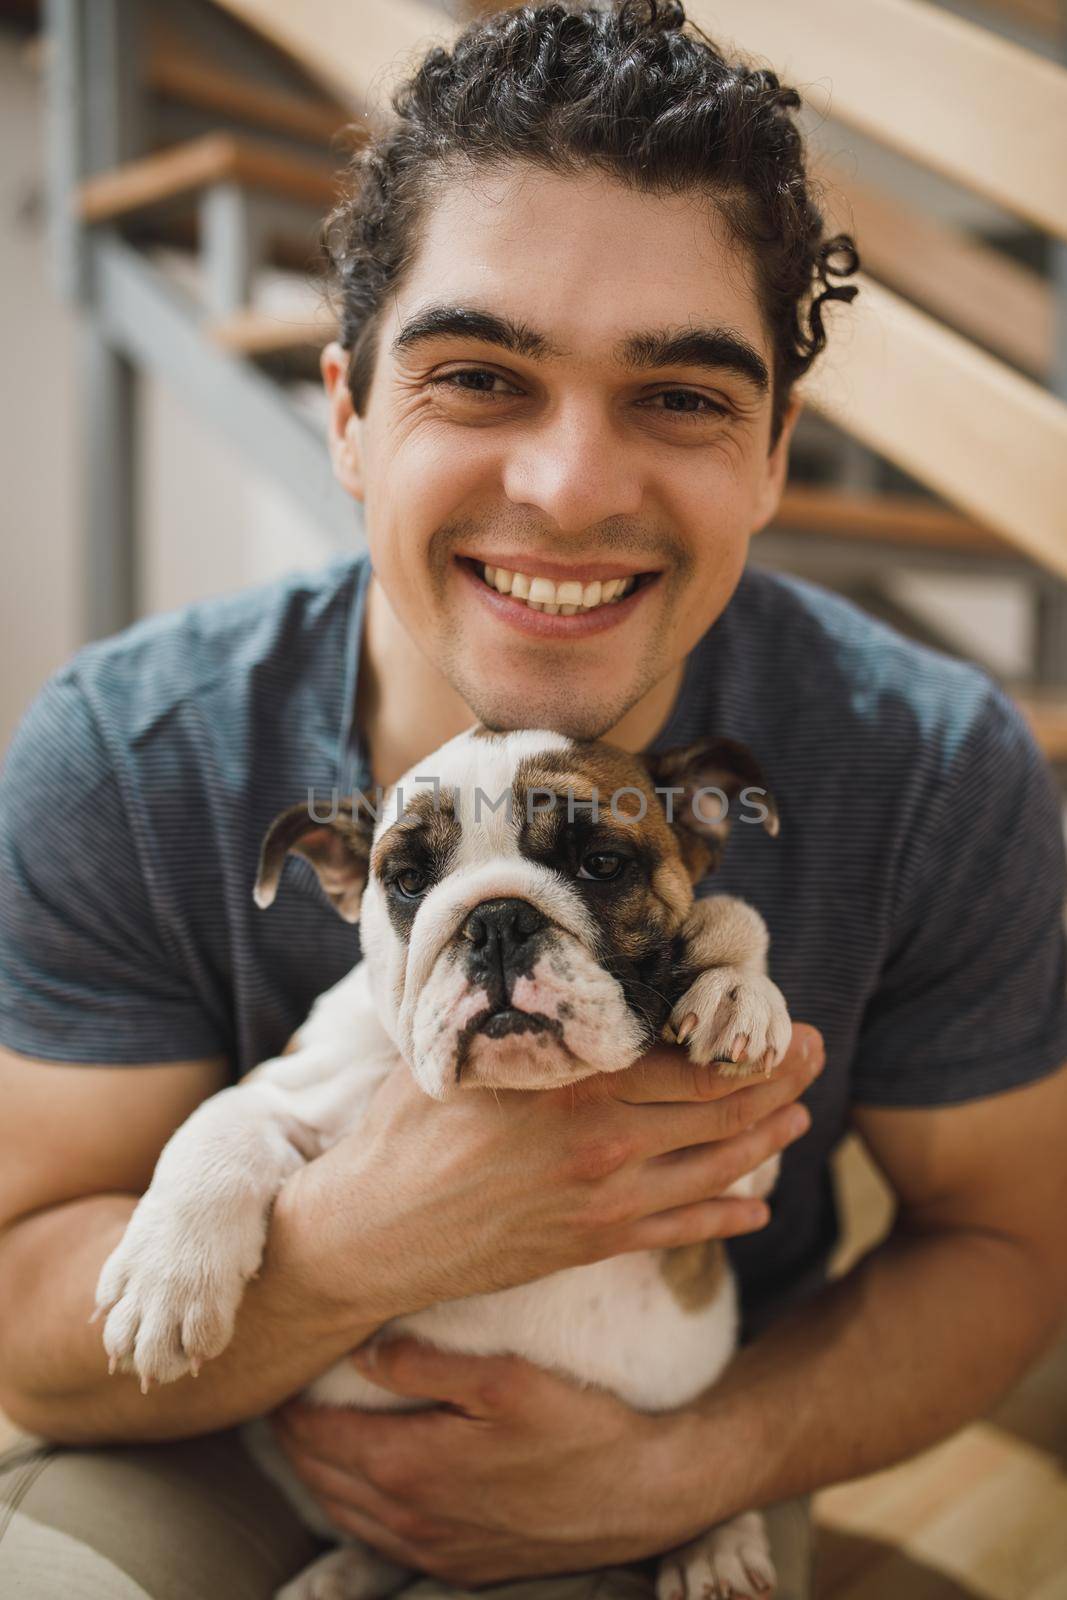 Portrait of a happy young man with his English bulldog puppy while moving into their new home. Looking at camera.